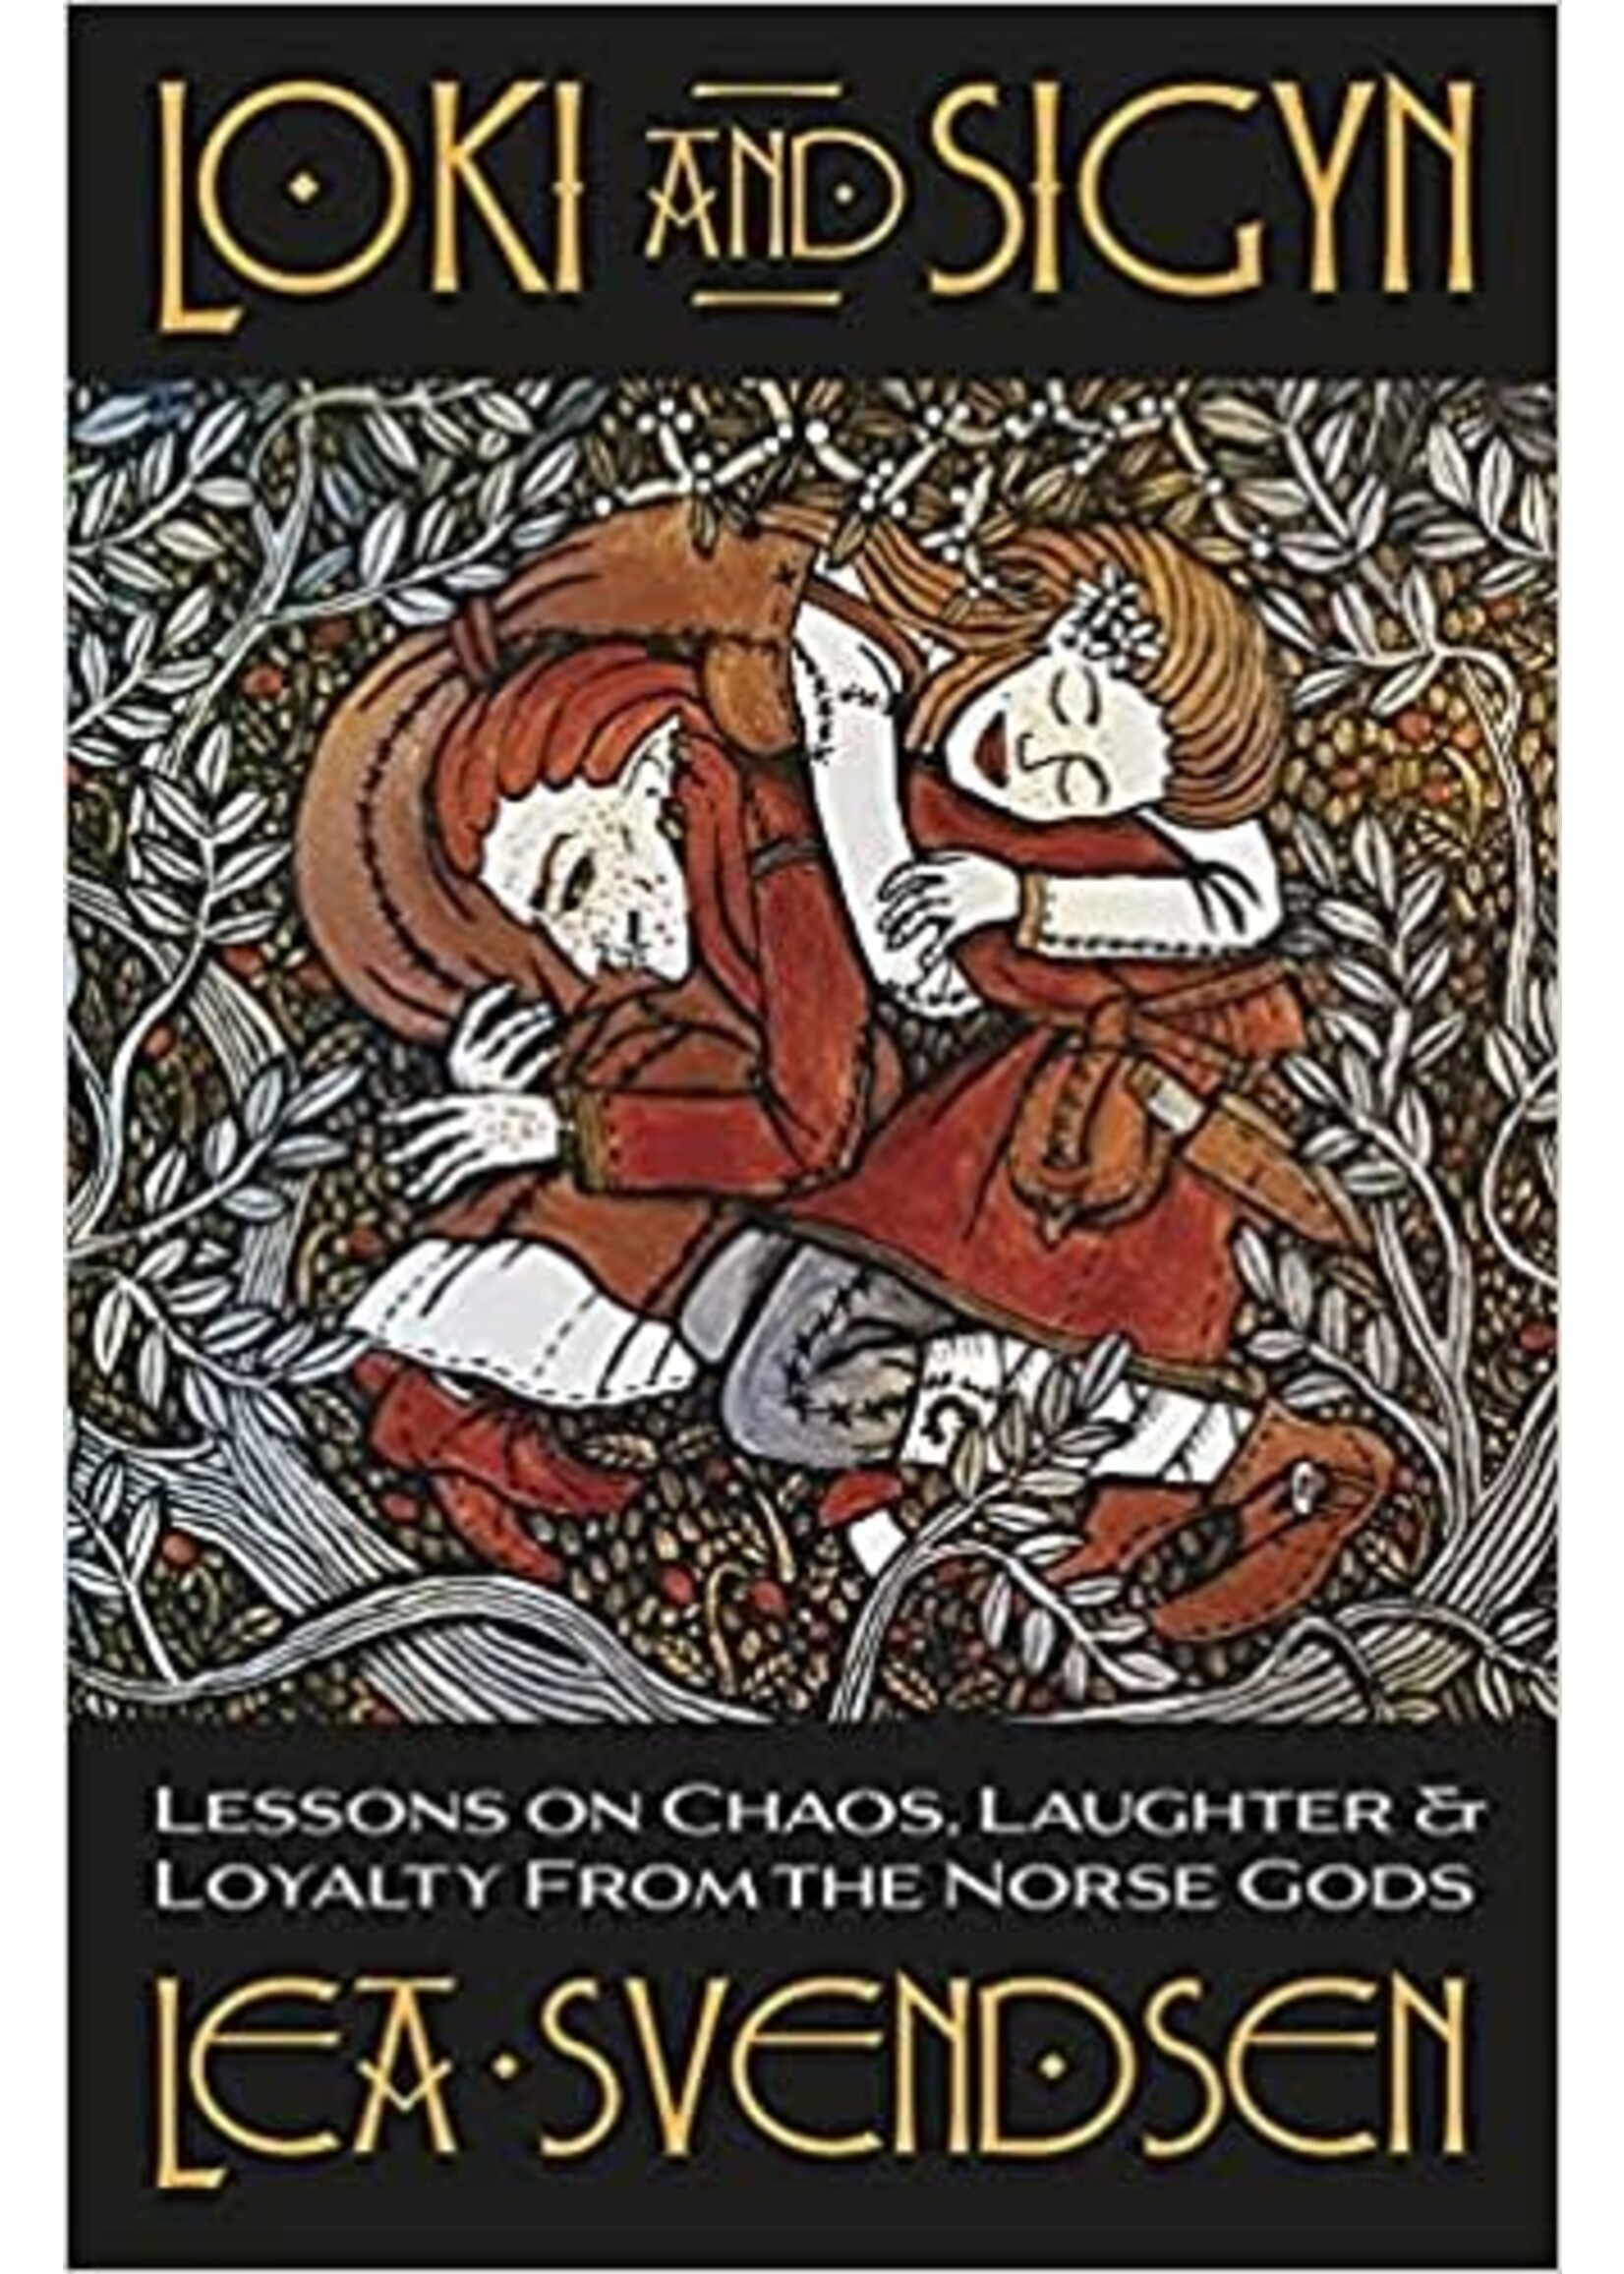 Loki And Sigyn: Lessons on Chaos,Laughter,and Loyalty From The Norse Gods by Lea Svendsen